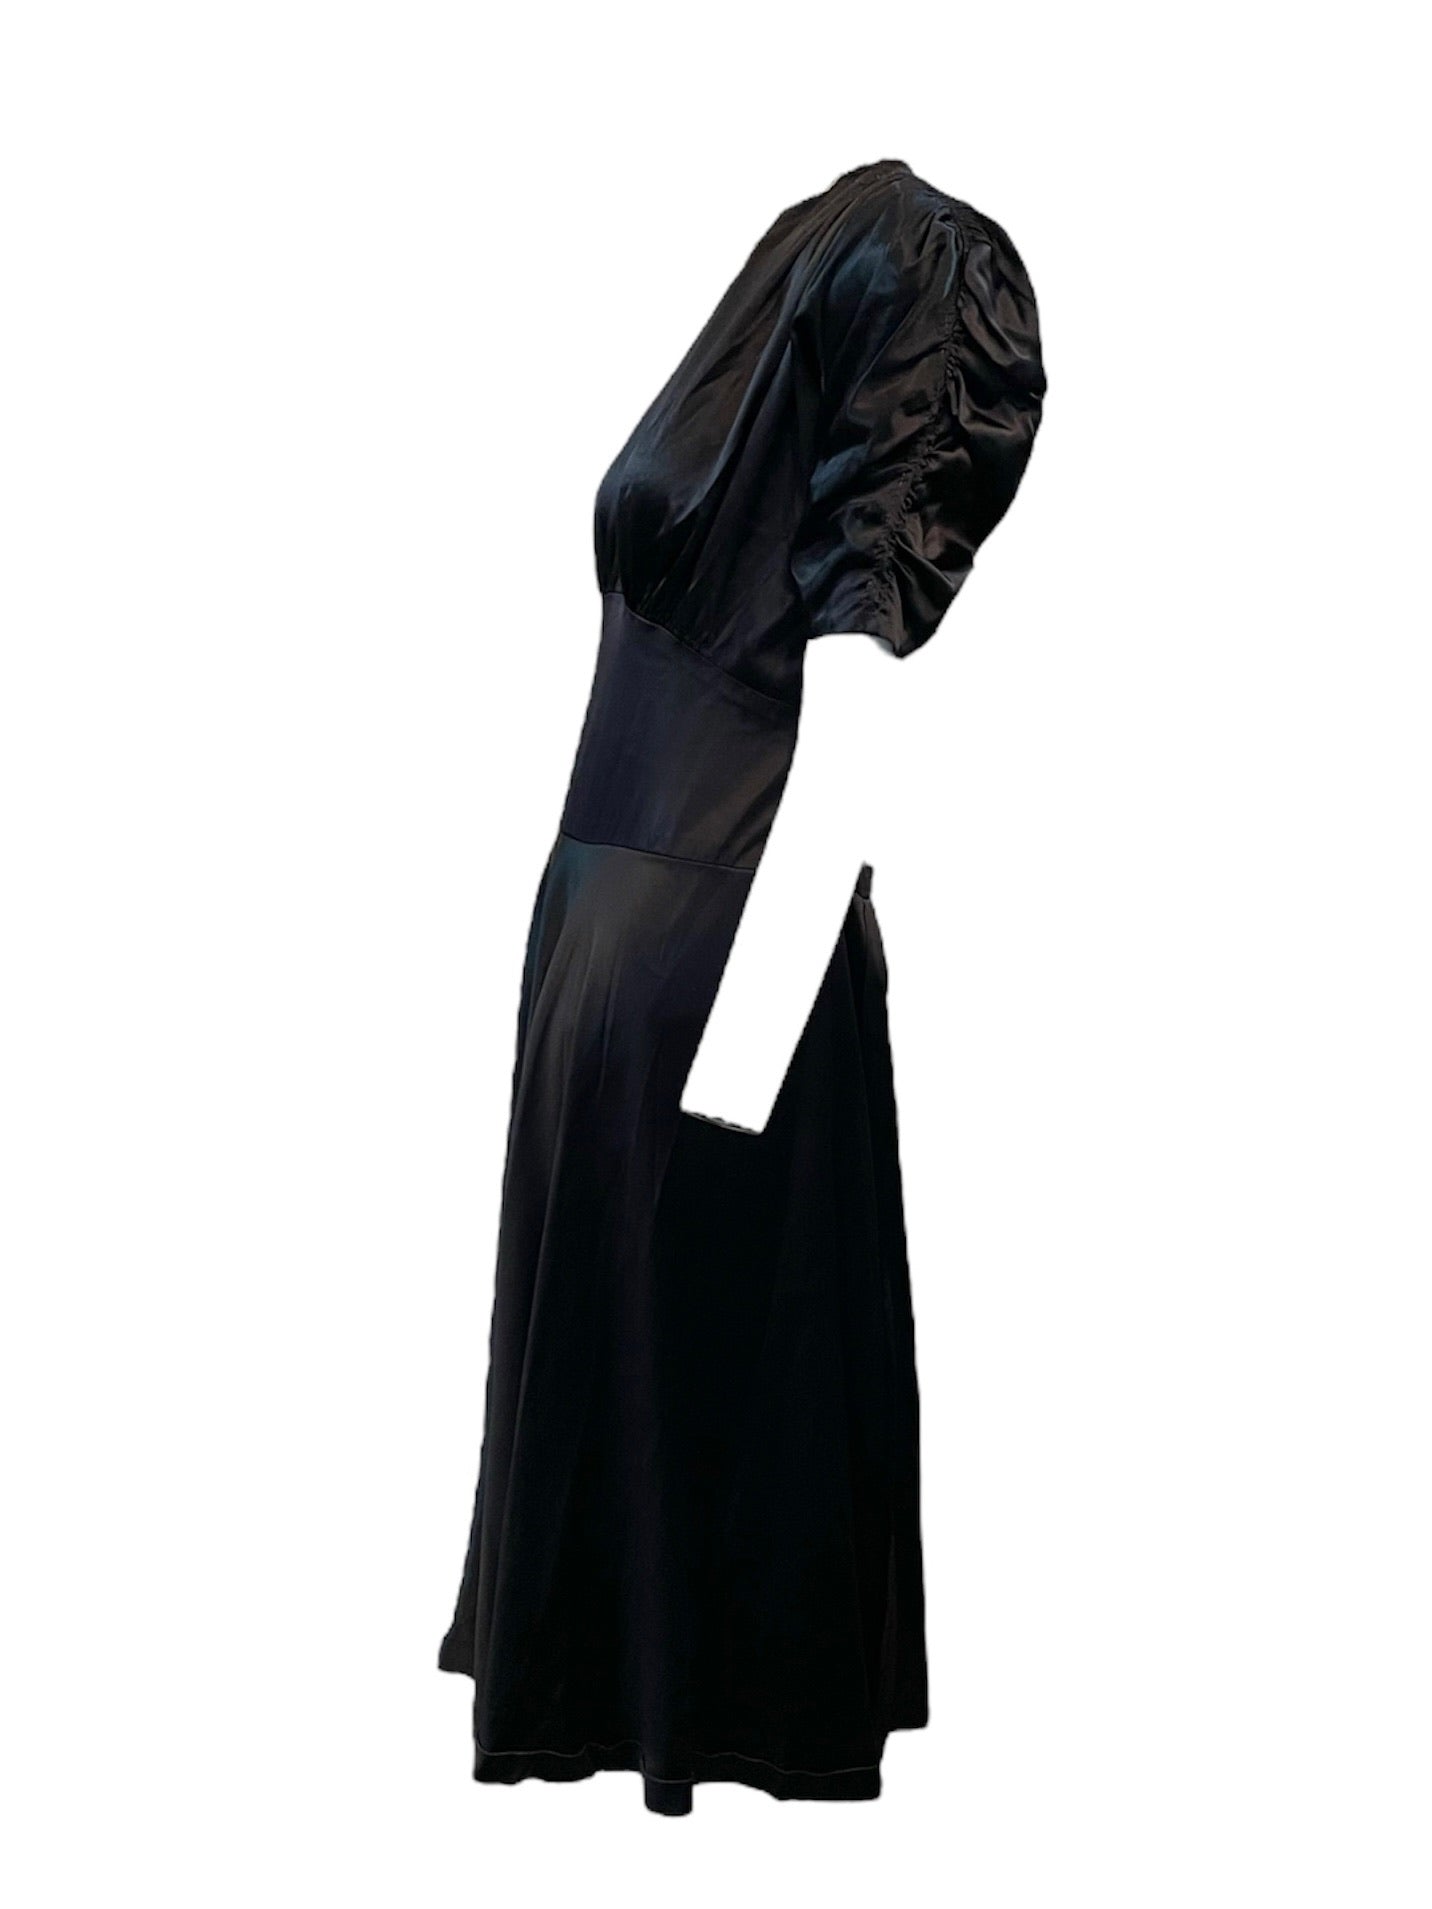 30s Black Satin Dress with Marcasite Buckle/ side 30s Black Satin Party Dress with Marcasite Buckle SIDE 2 of 5